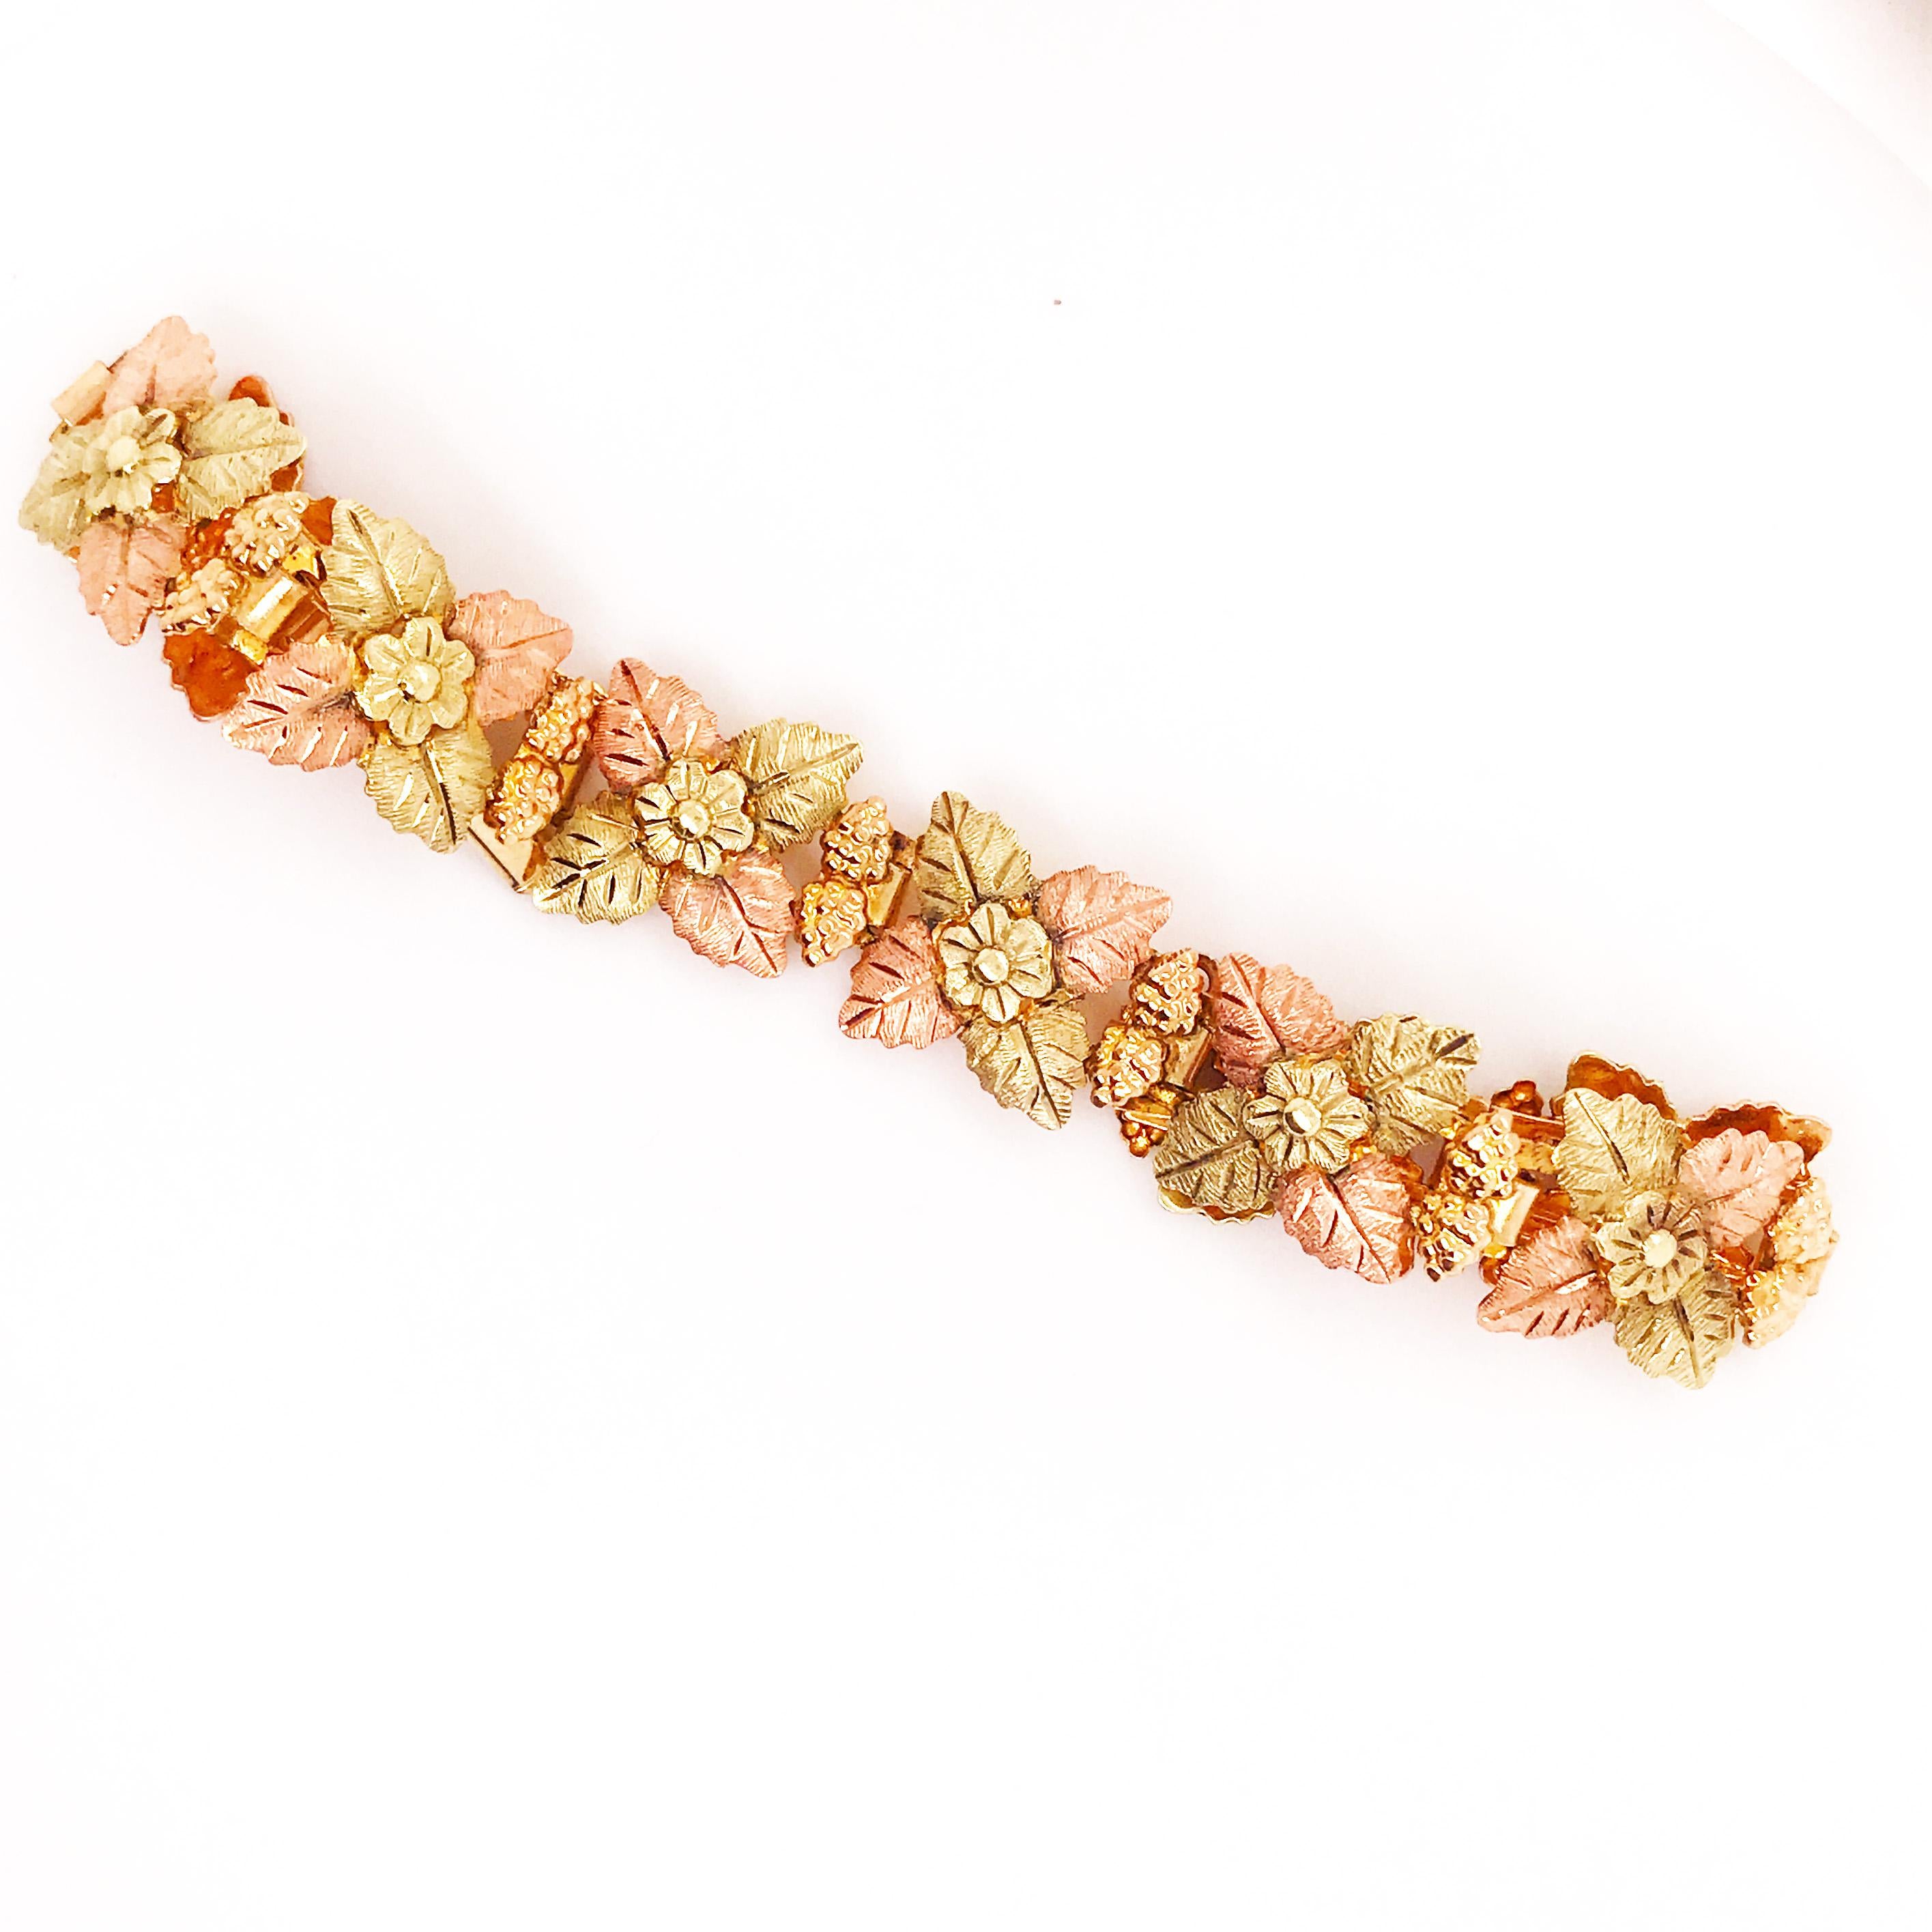 This is such a fun, unique fine jewelry accessory! This bracelet has a flower and leaf design with hand crafted texture and finished that are special to this piece. This is a statement bracelet with unique detail work and tri-color gold-rose, green,